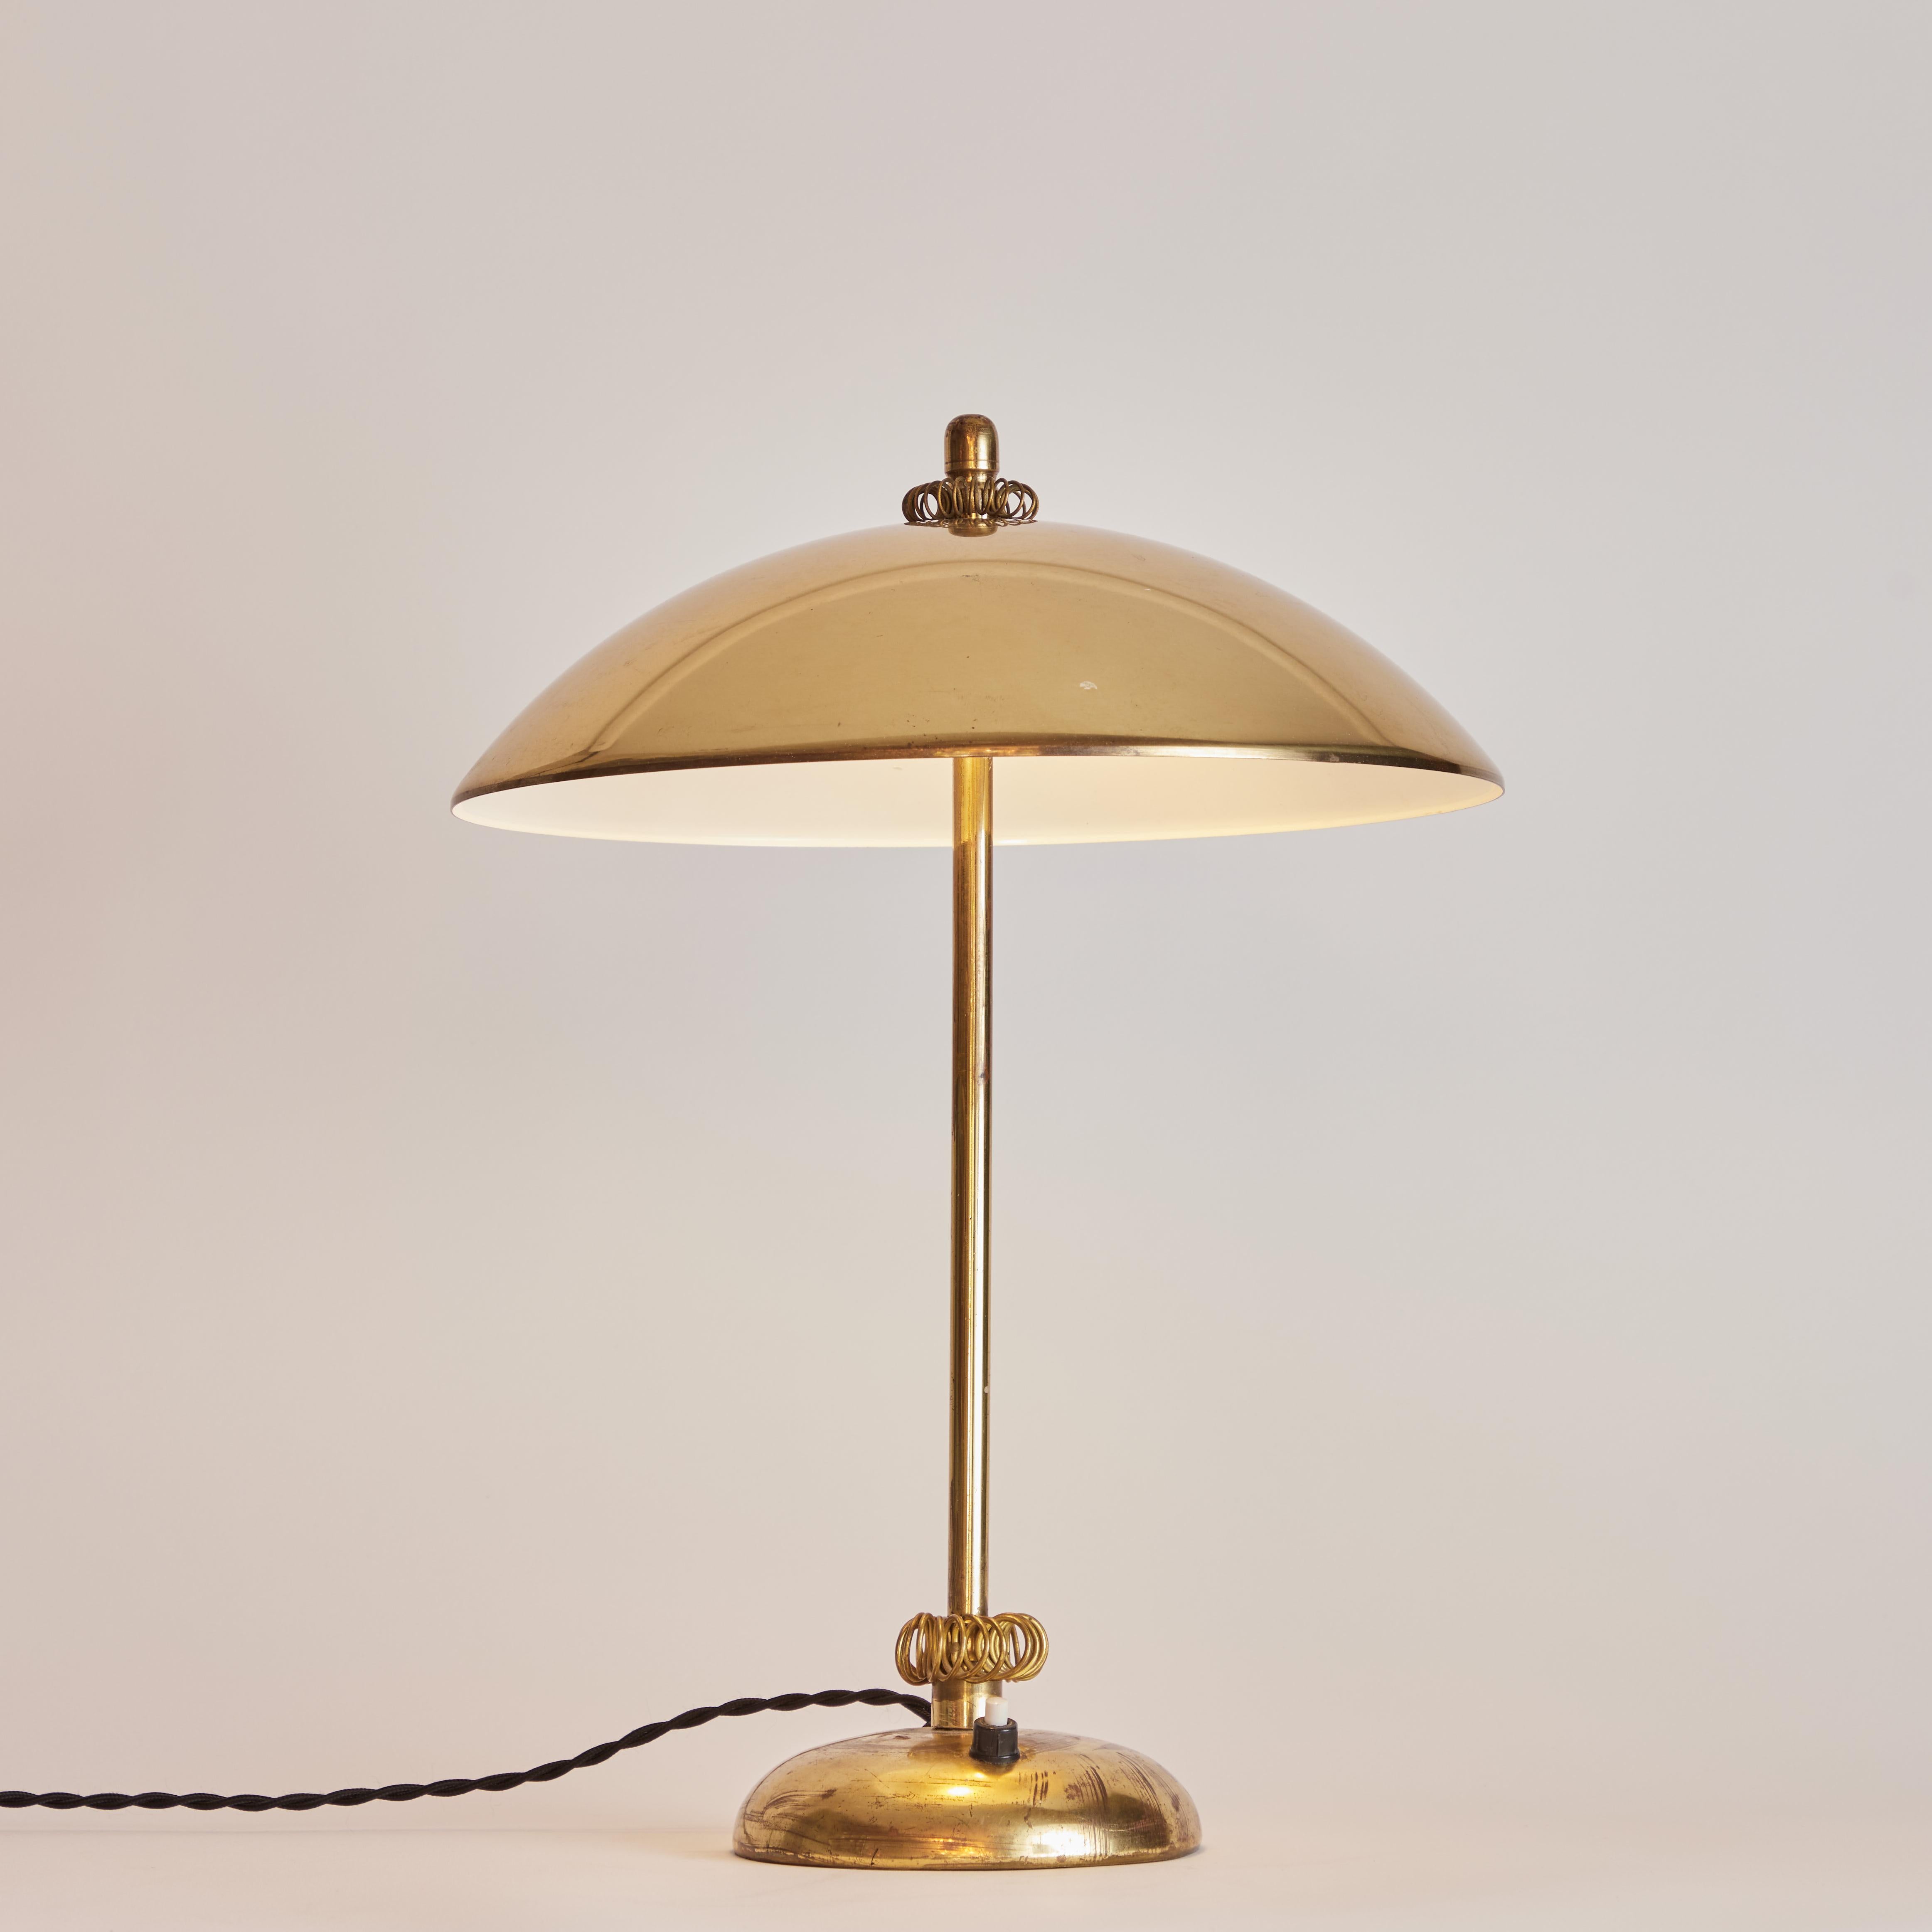 1950s Finnish brass table lamp Attributed to Paavo Tynell. An elegant design executed in attractively patinated brass and adorned with a pair of Tynell's trademark sculptural brass coils.

The undisputed master of Finnish lighting design, the